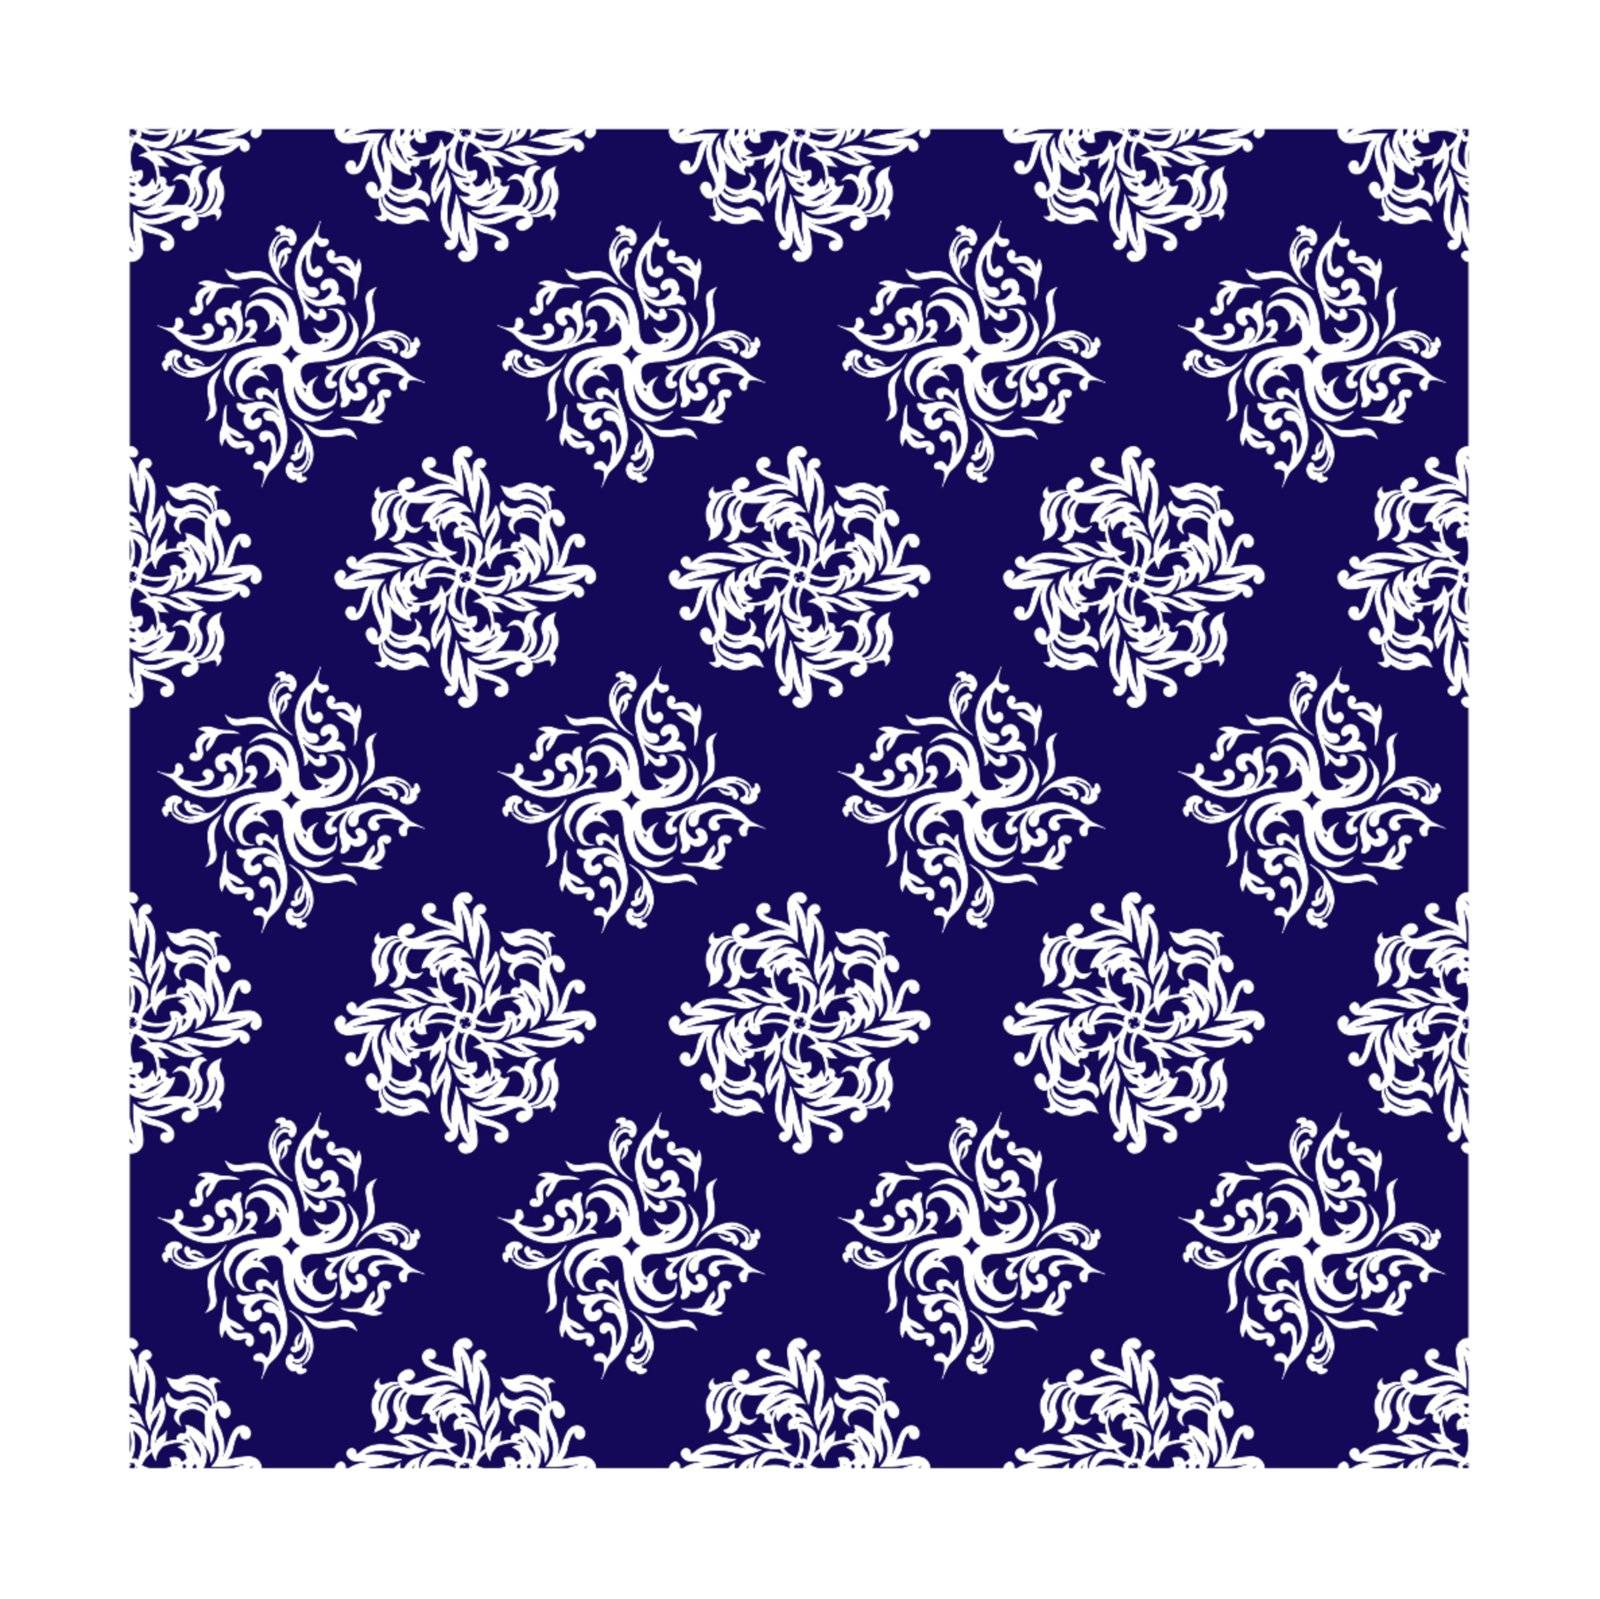 Royal blue and silver repeating design that seamlessly joins